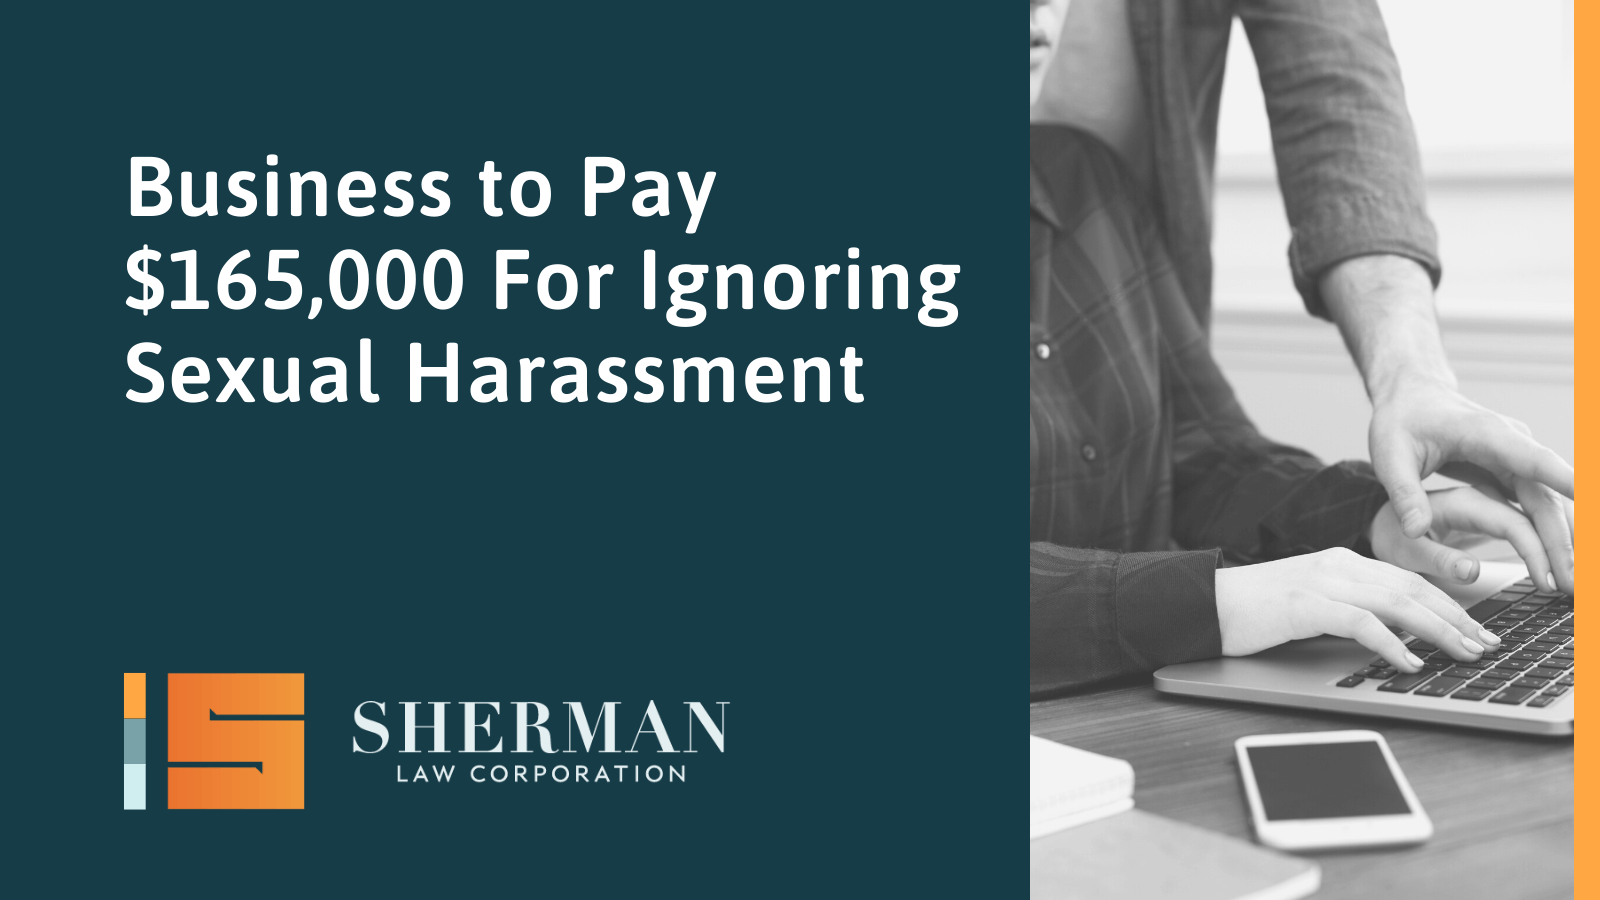 Business to Pay $165,000 For Ignoring Sexual Harassment- california employment lawyer - sherman law corporation(